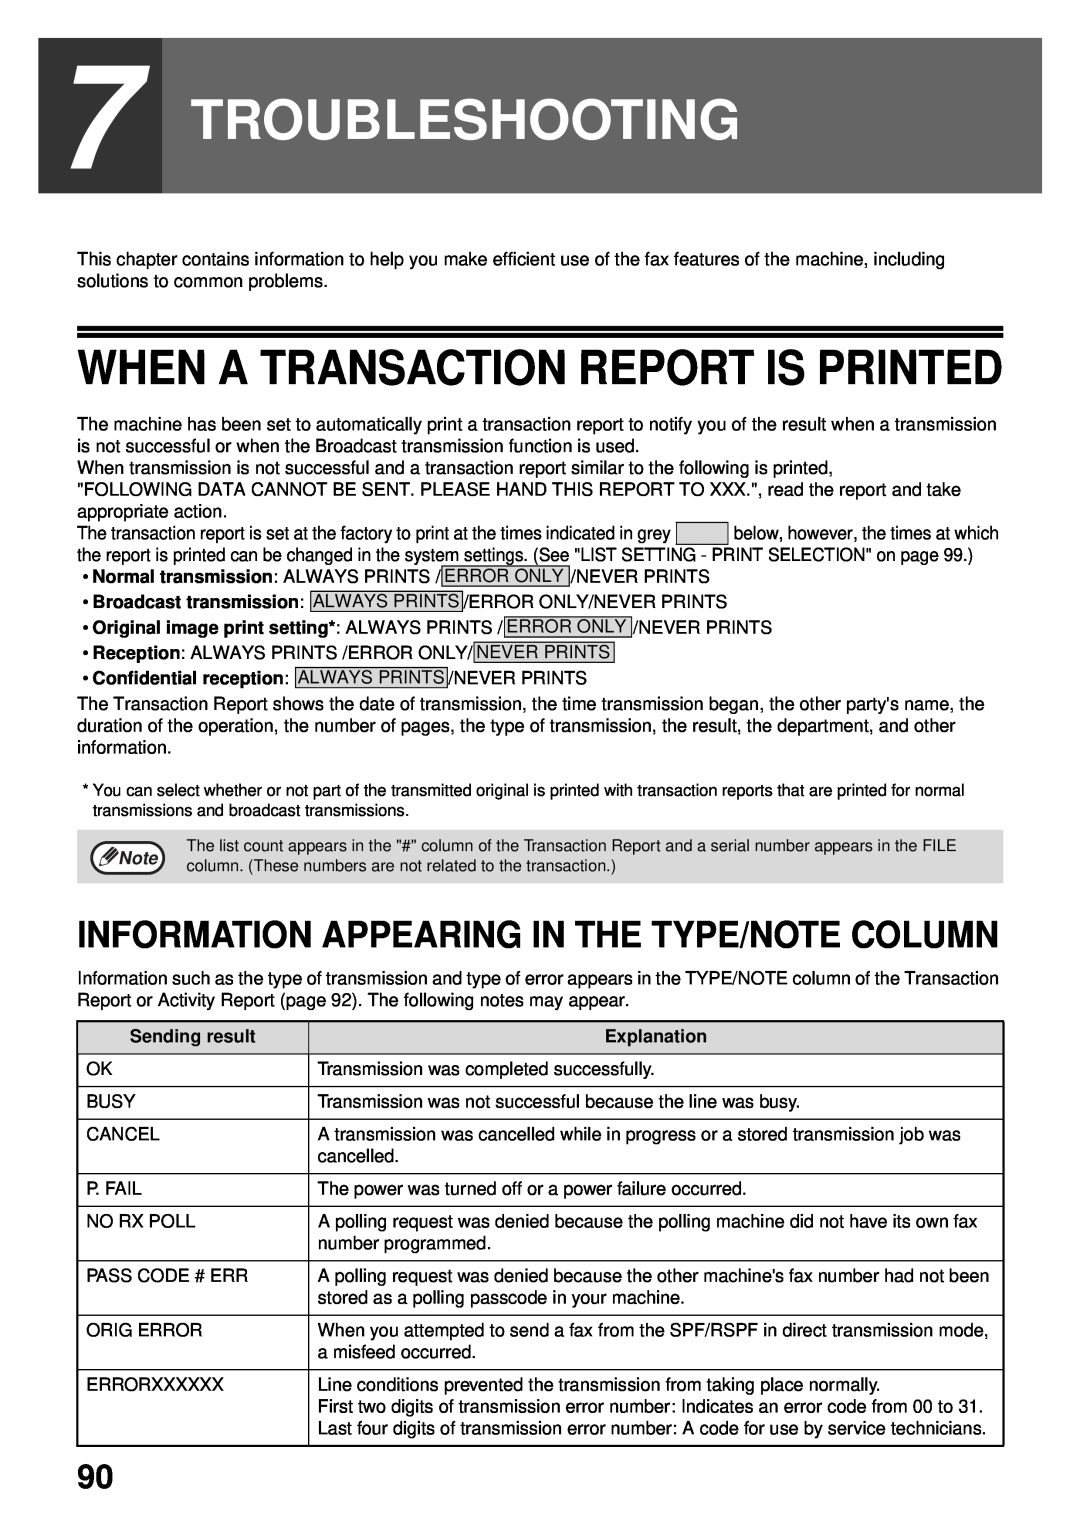 Sharp MX-FX13 appendix Troubleshooting, When A Transaction Report Is Printed, Information Appearing In The Type/Note Column 